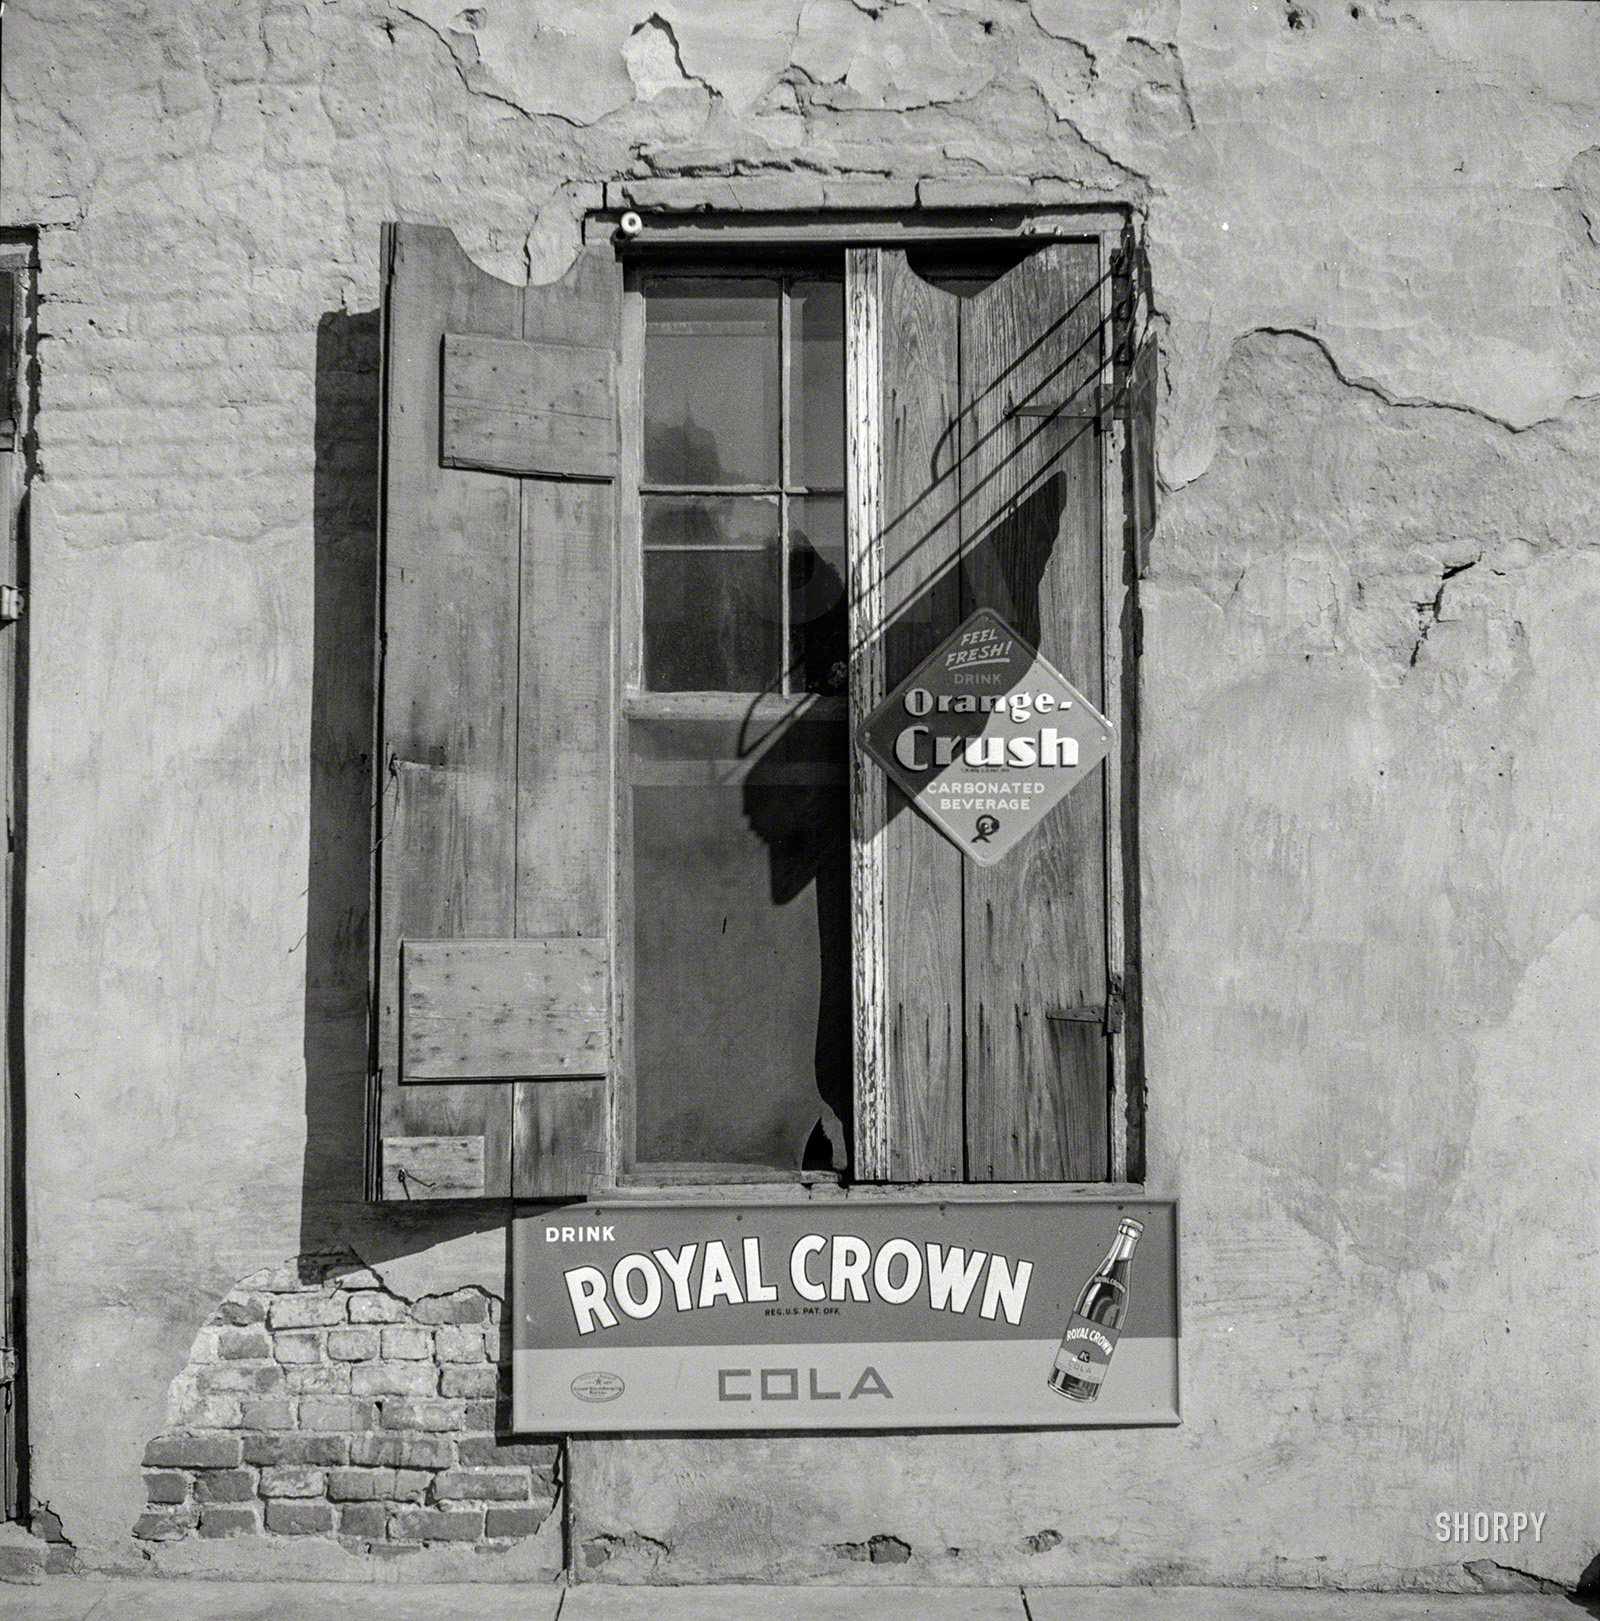 August 1940. "Natchez, Mississippi, grocery window." Illustrating the gradual accretion of soft-drink signage on retail stores like barnacles on the hull of a ship. Medium format negative by Marion Post Wolcott. View full size.